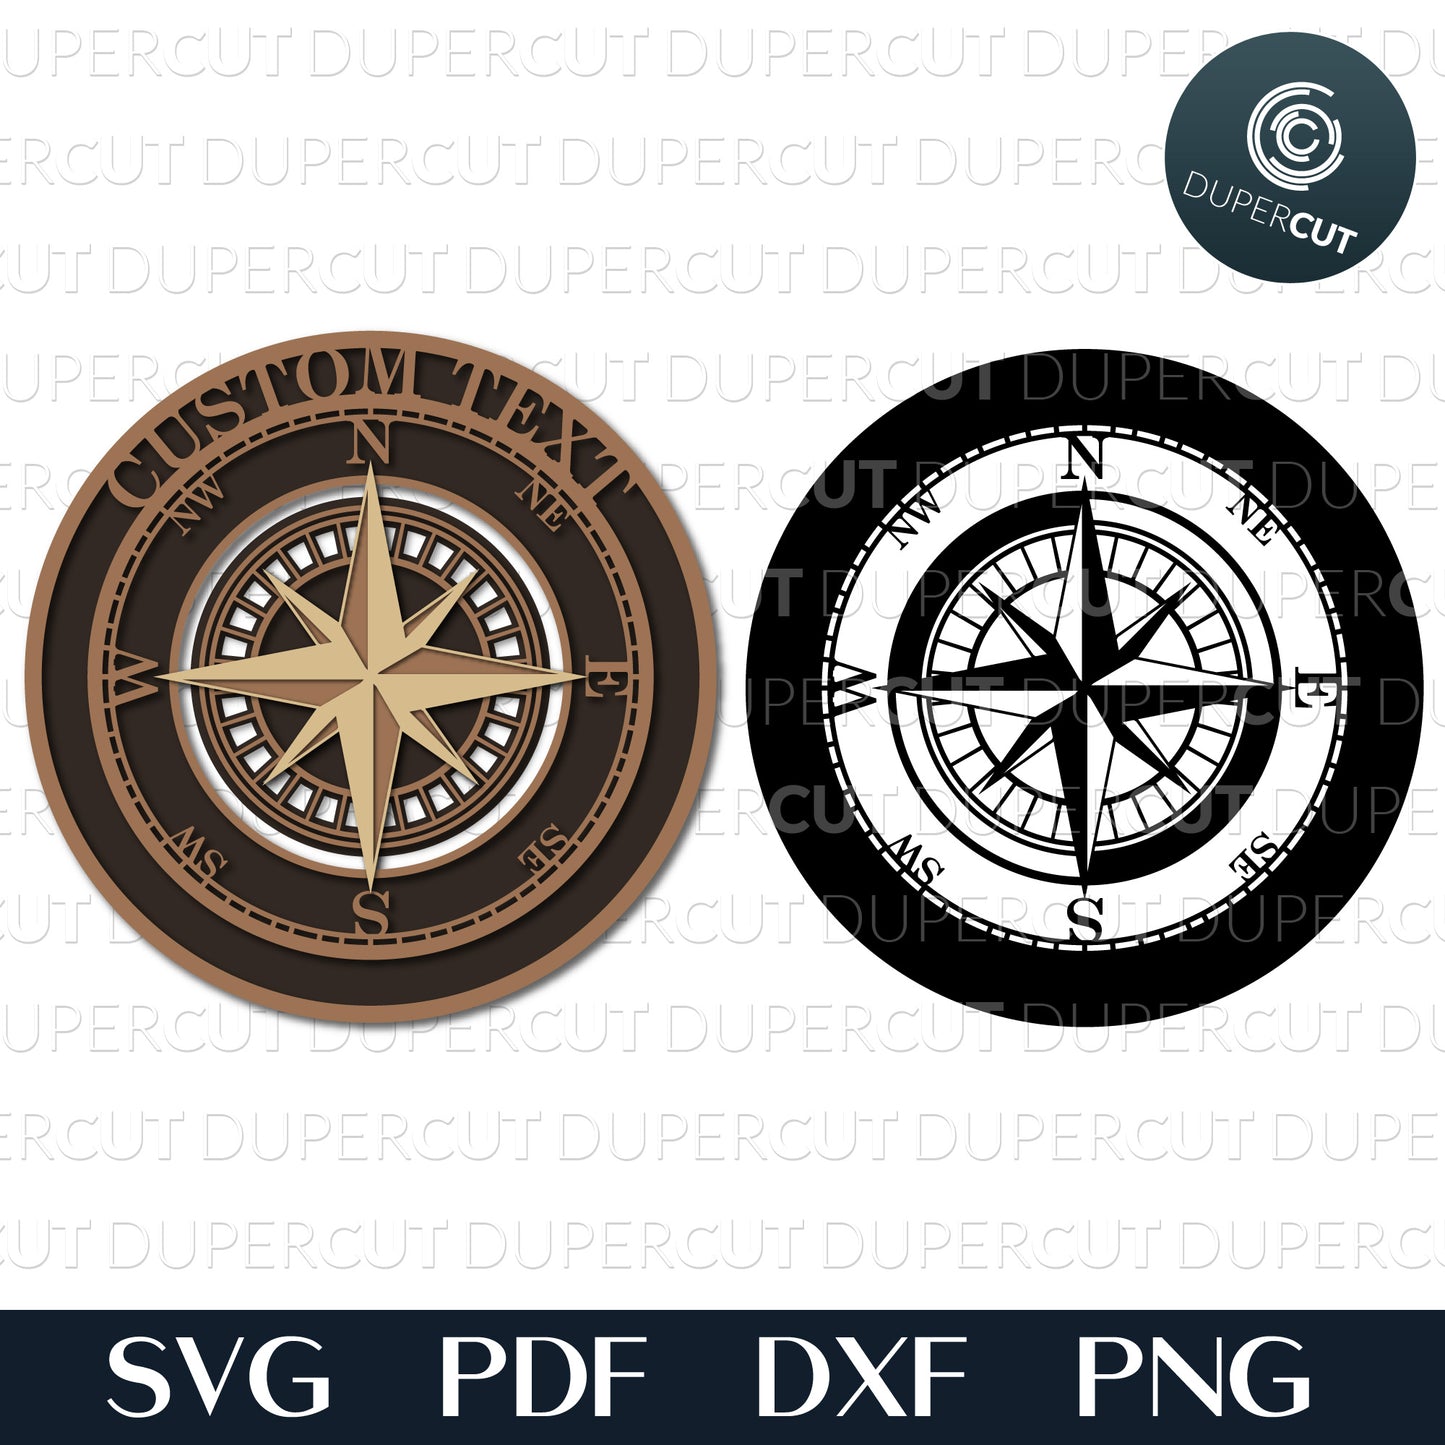 Custom DMS coordinates compass, SVG PNG DXF files for cutting, laser engraving, scrapbooking. For use with Cricut, Glowforge, Silhouette, CNC machines.